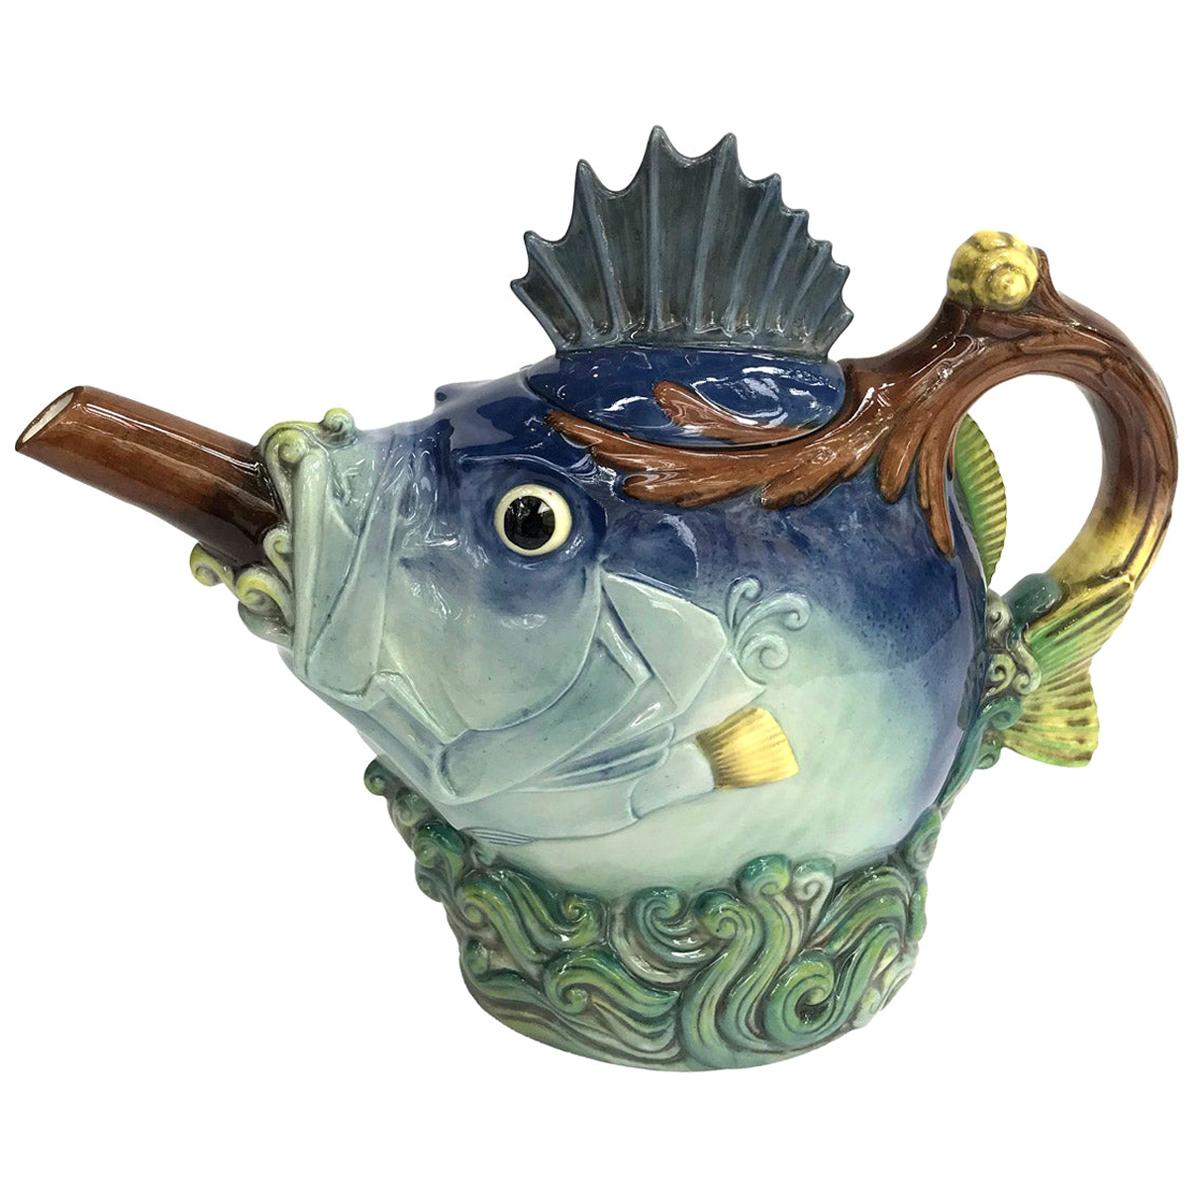 Majolica "Fish Teapot by Minton limited edition